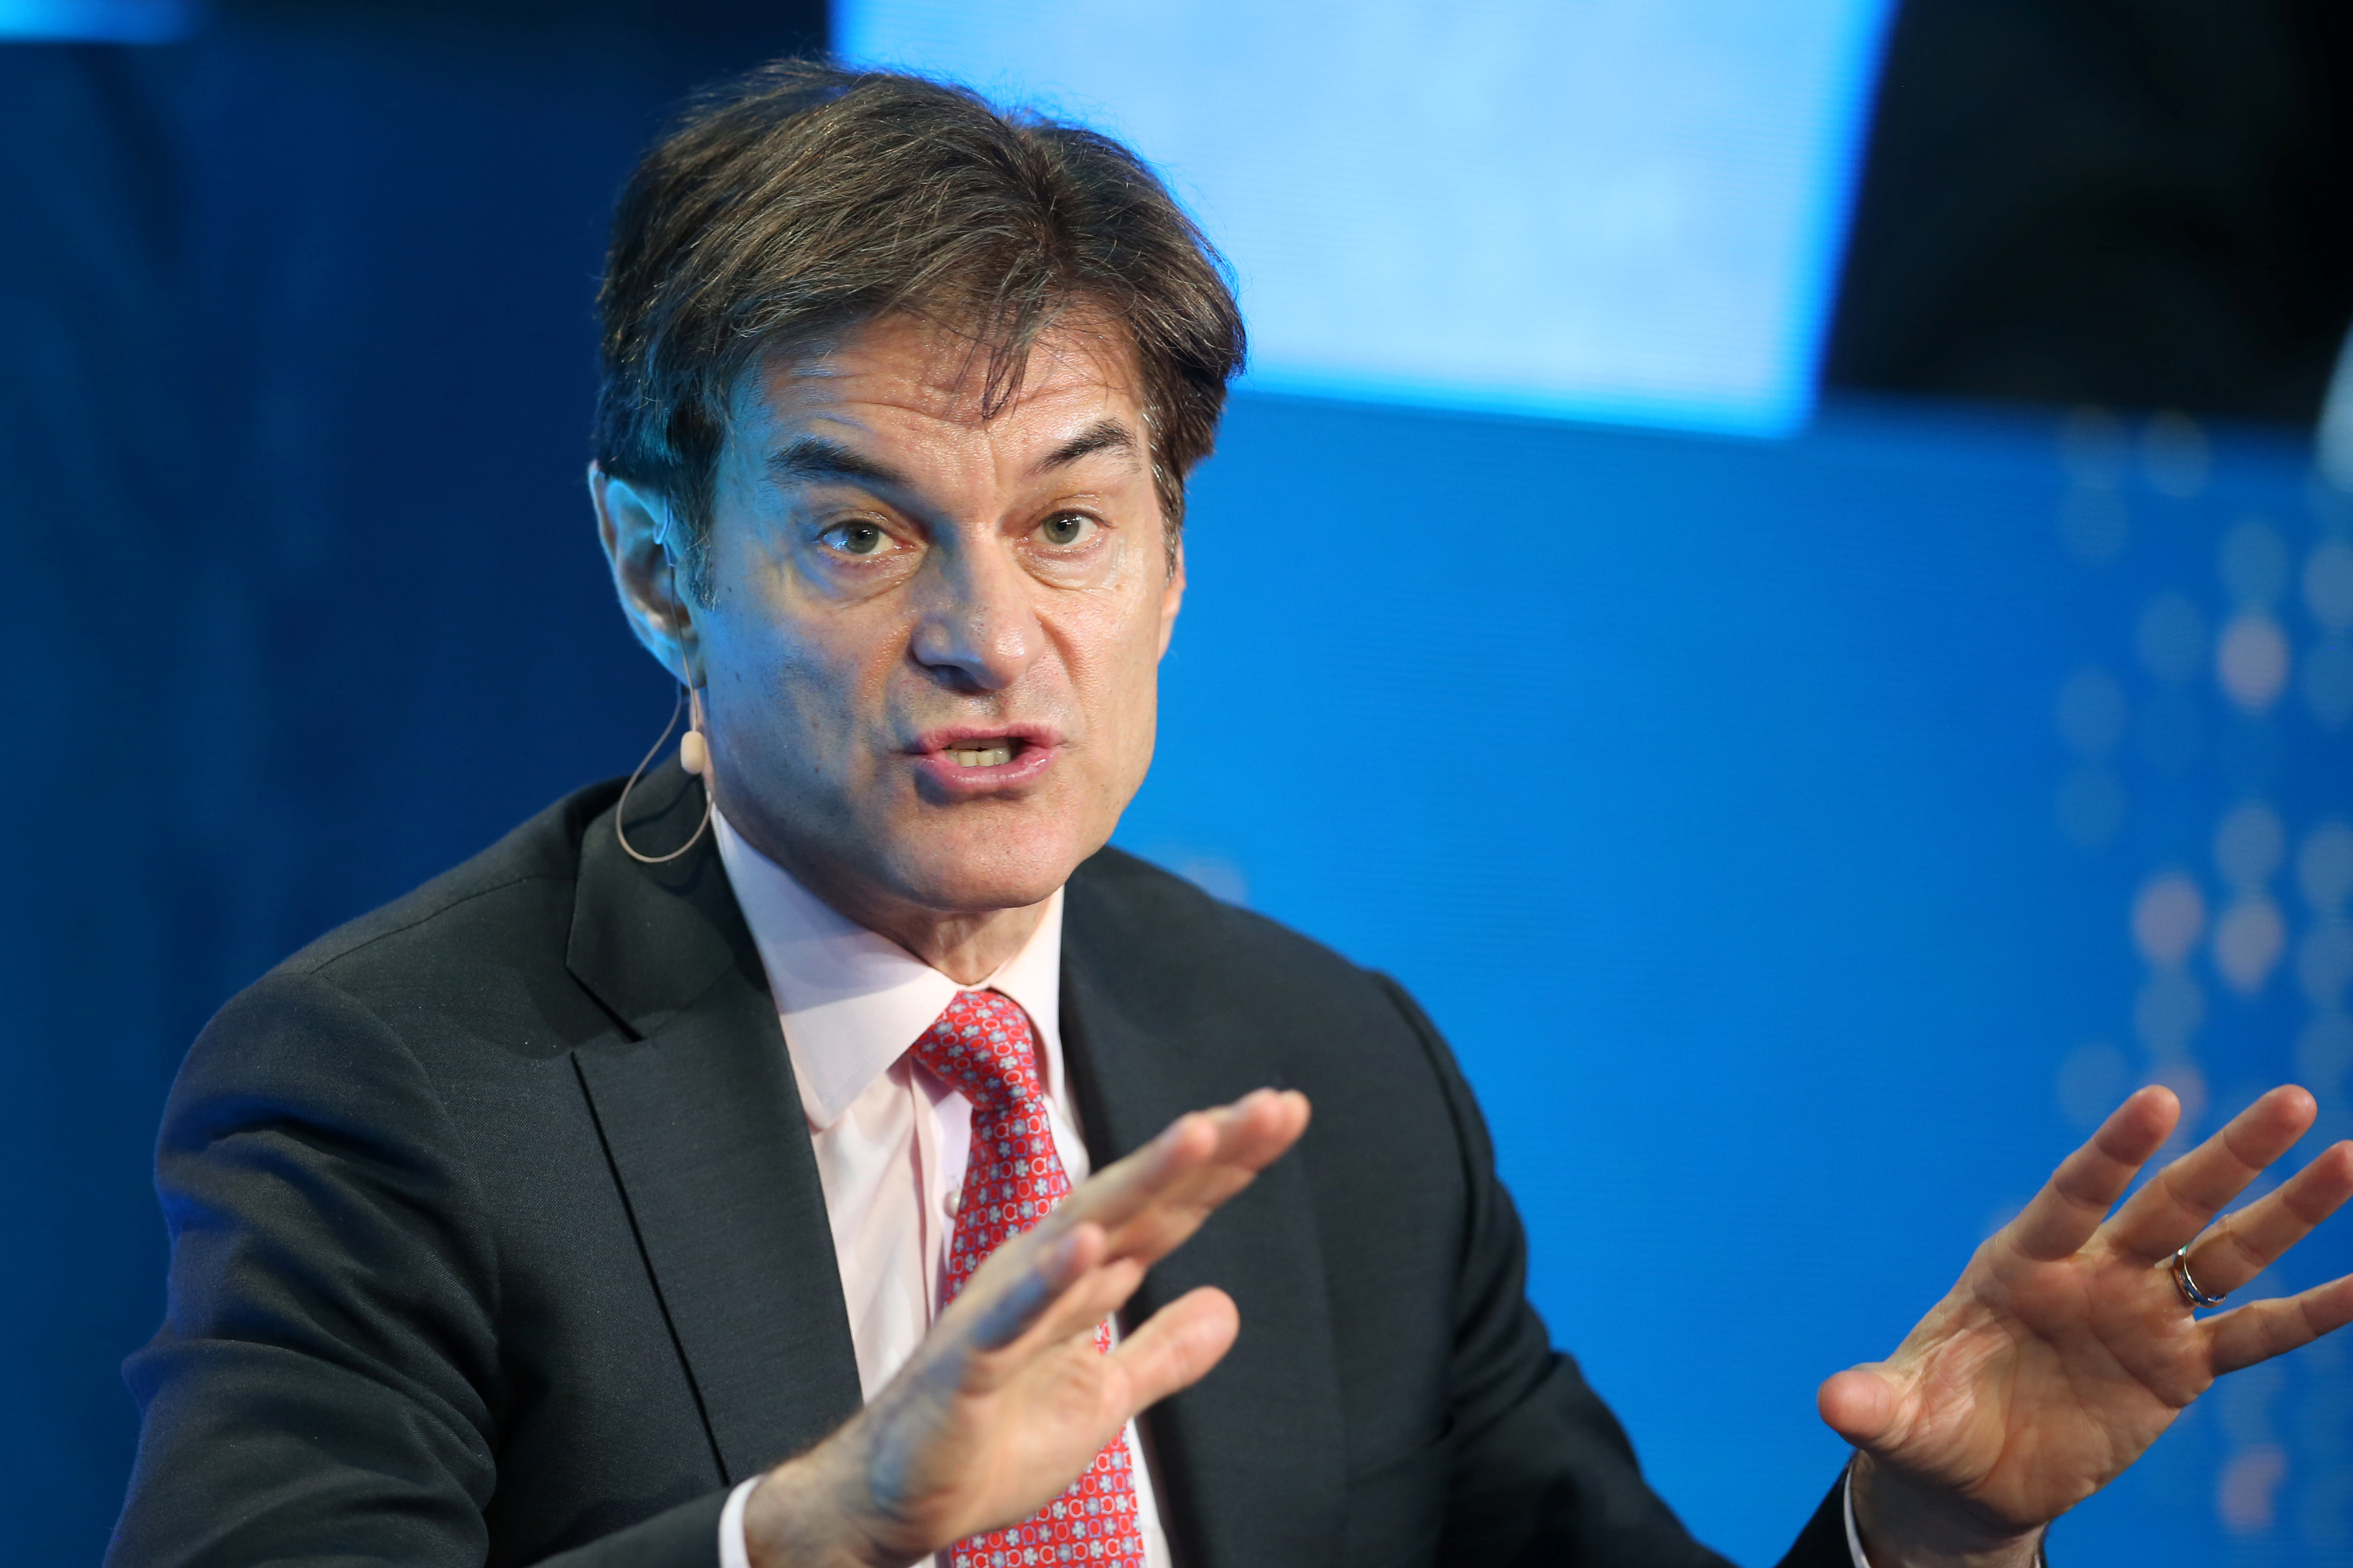 Mehmet Oz, Host of the Dr. Oz Show and Professor of Surgery, Columbia University, speaks during the Milken Institute Global Conference in Beverly Hills, California, U.S., May 3, 2017. REUTERS/Lucy Nicholson